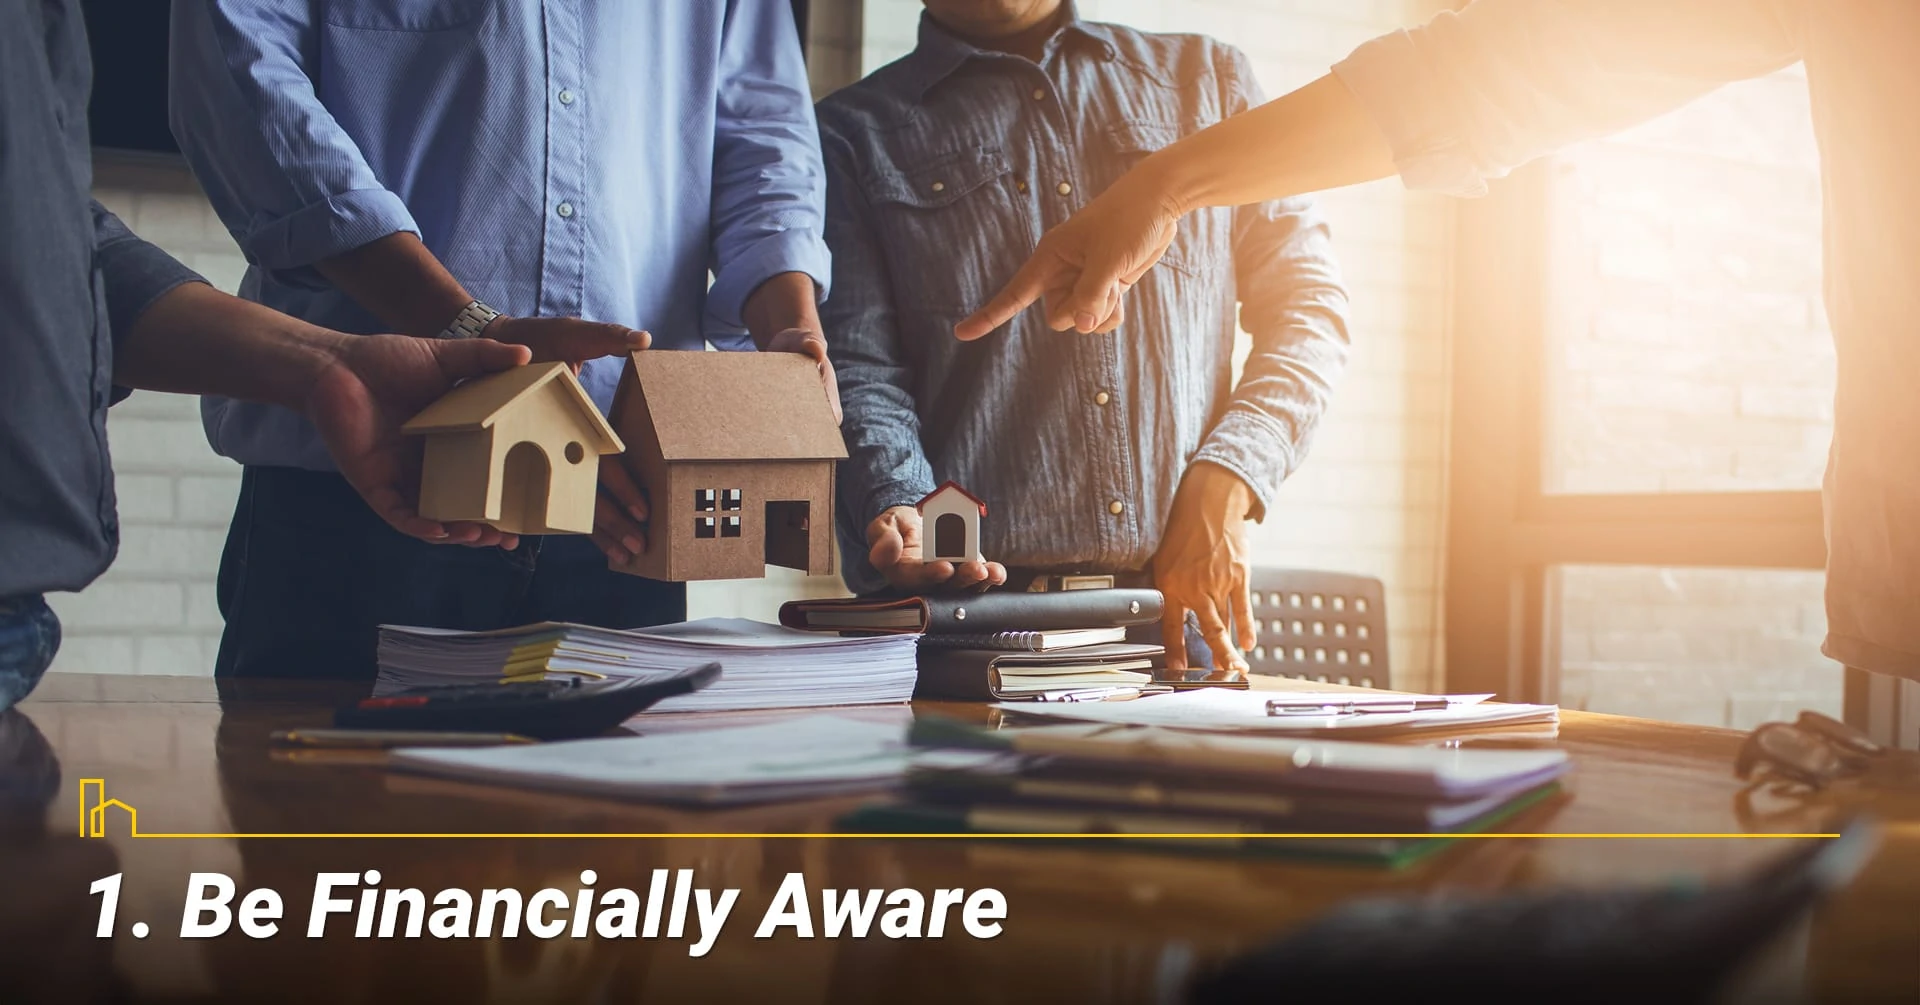 Be Financially Aware, aware of your financial situation